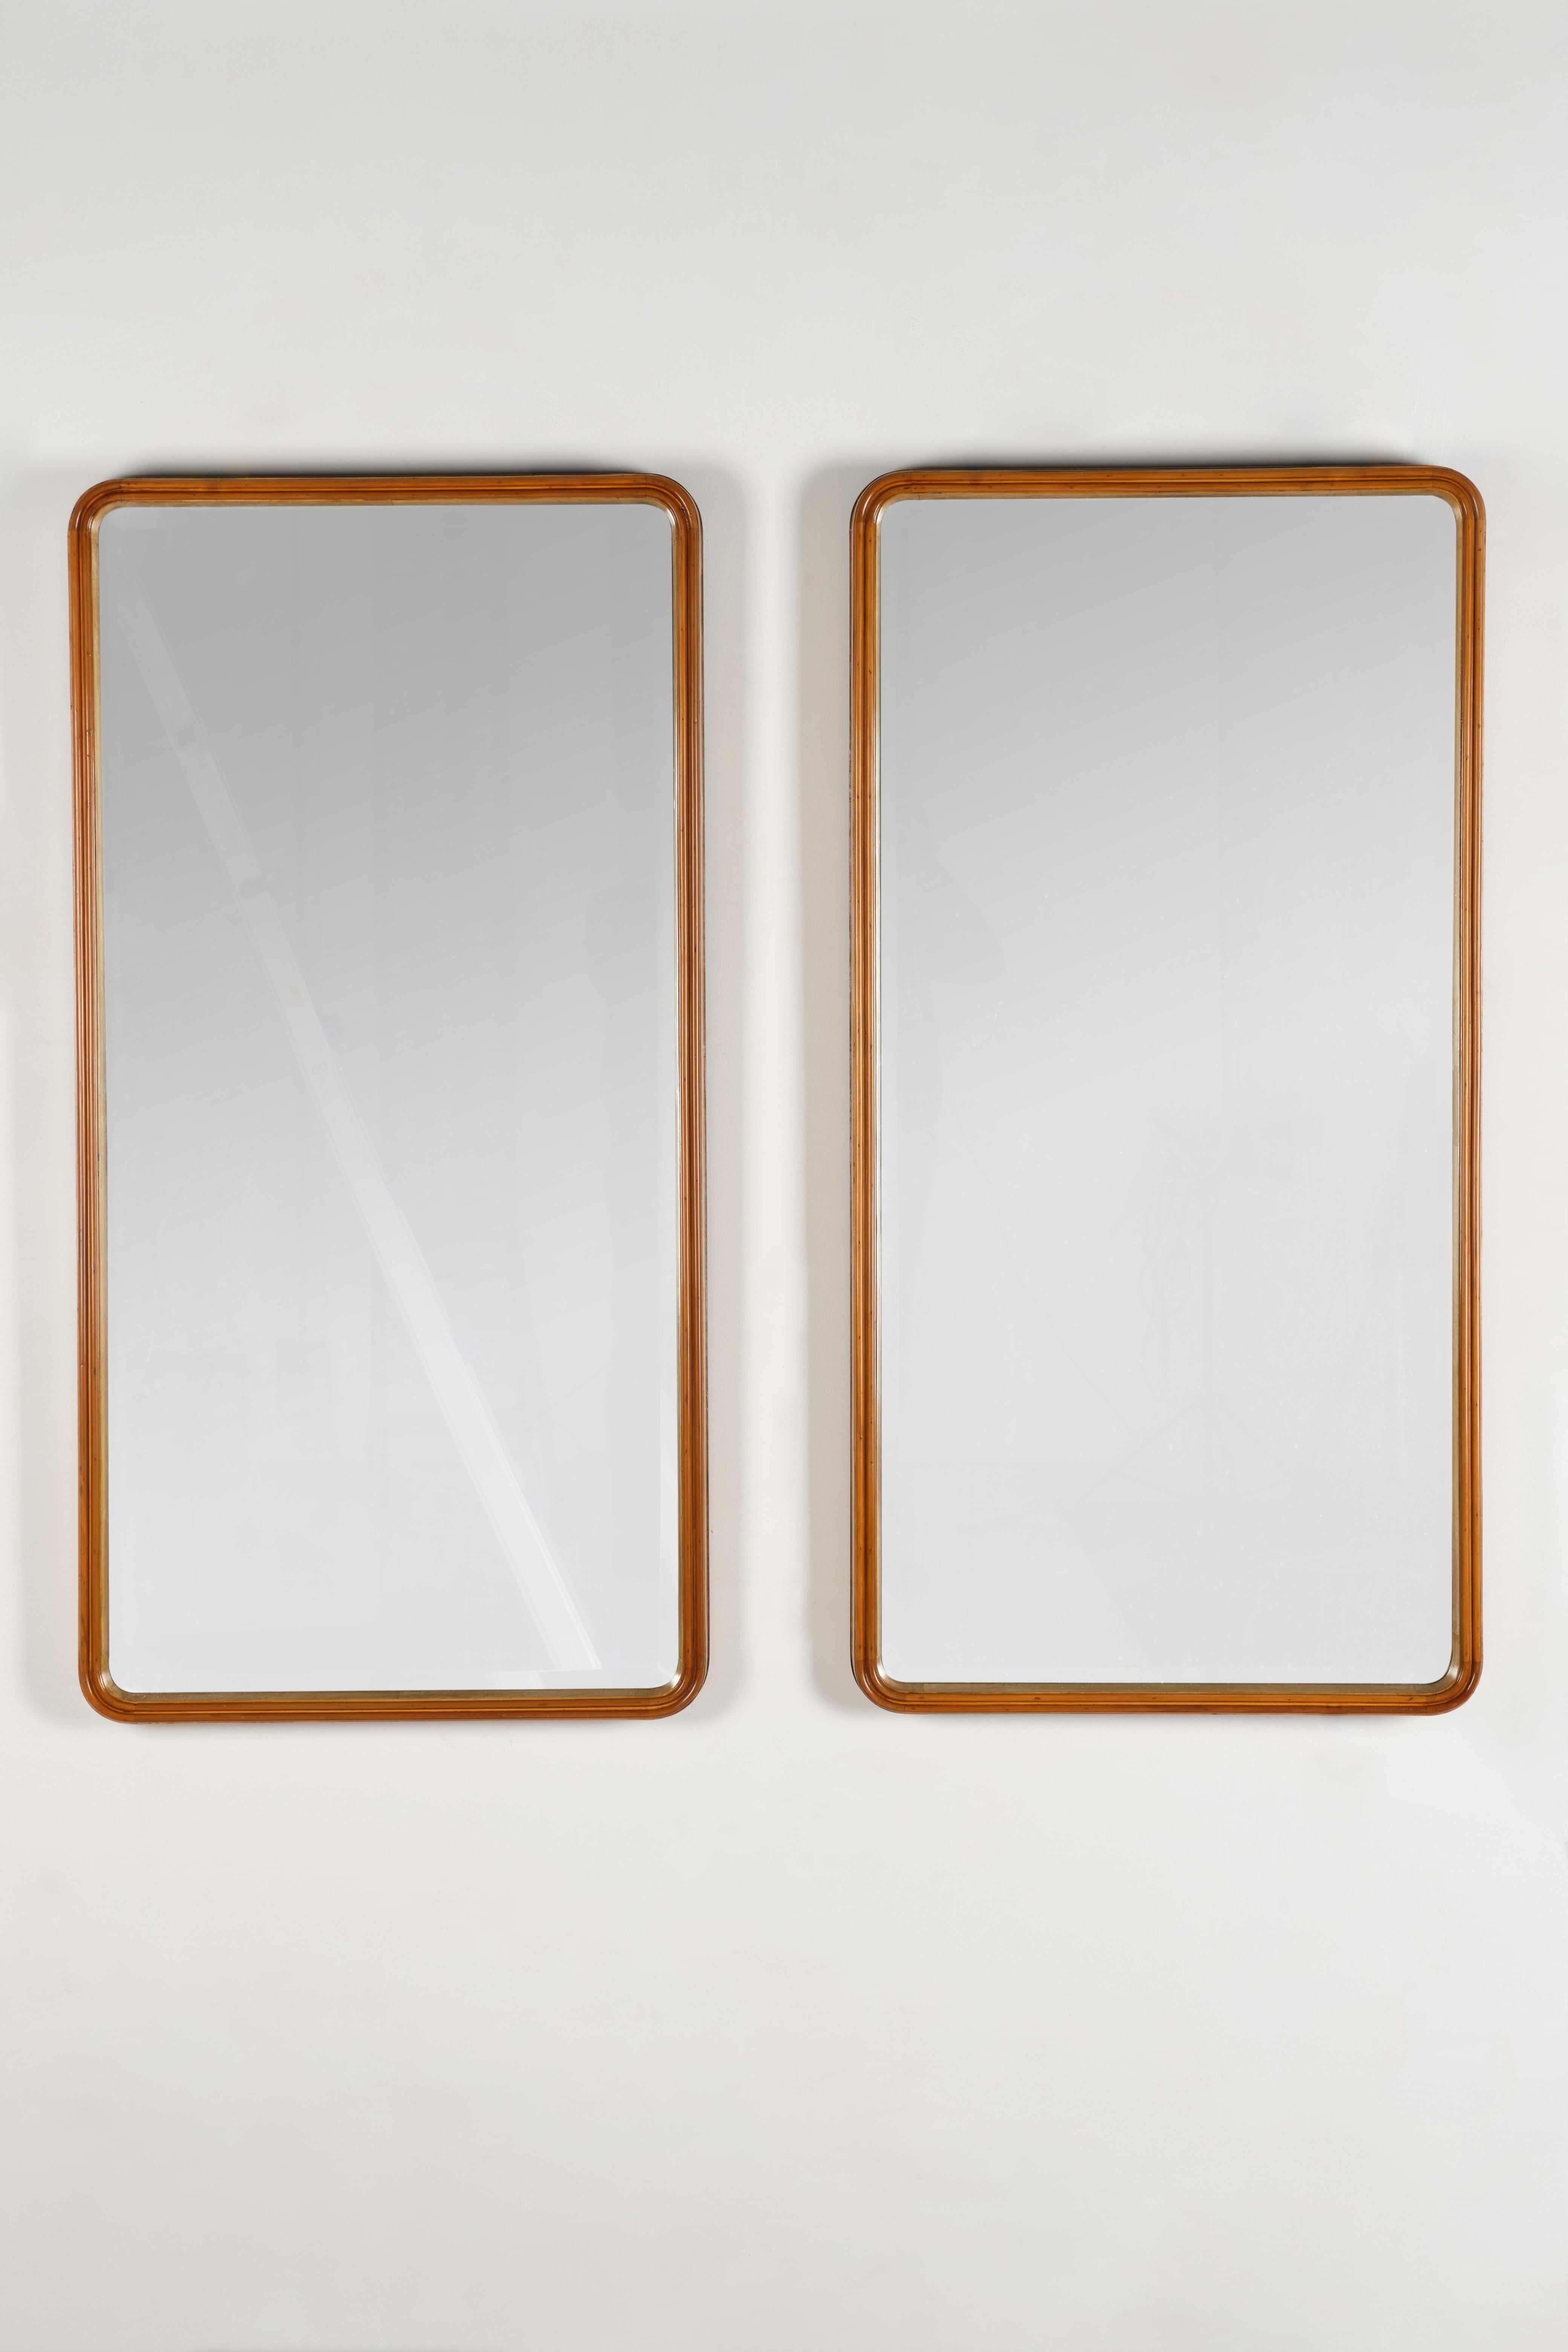 Pair of modernist wall mirrors with wooden construre and covered by lacquered parchment, creating color variations.
    